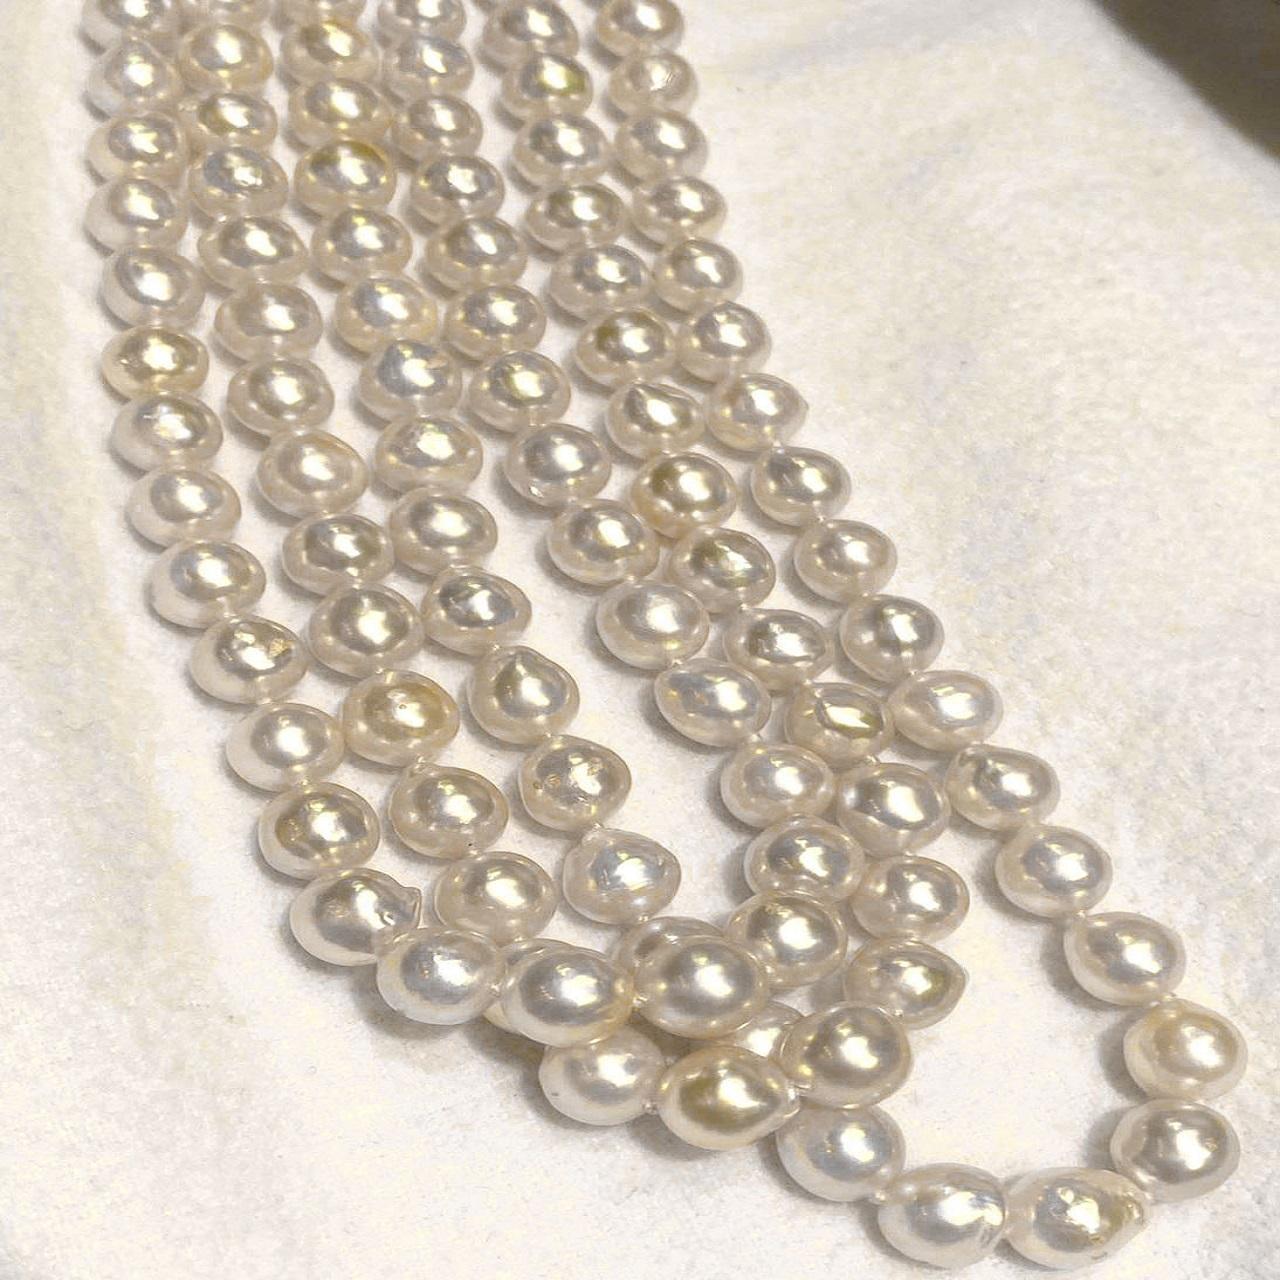 Akoya semi baroque pearls 7-8mm 14k yellow gold clasp 16-18inches #IP26
